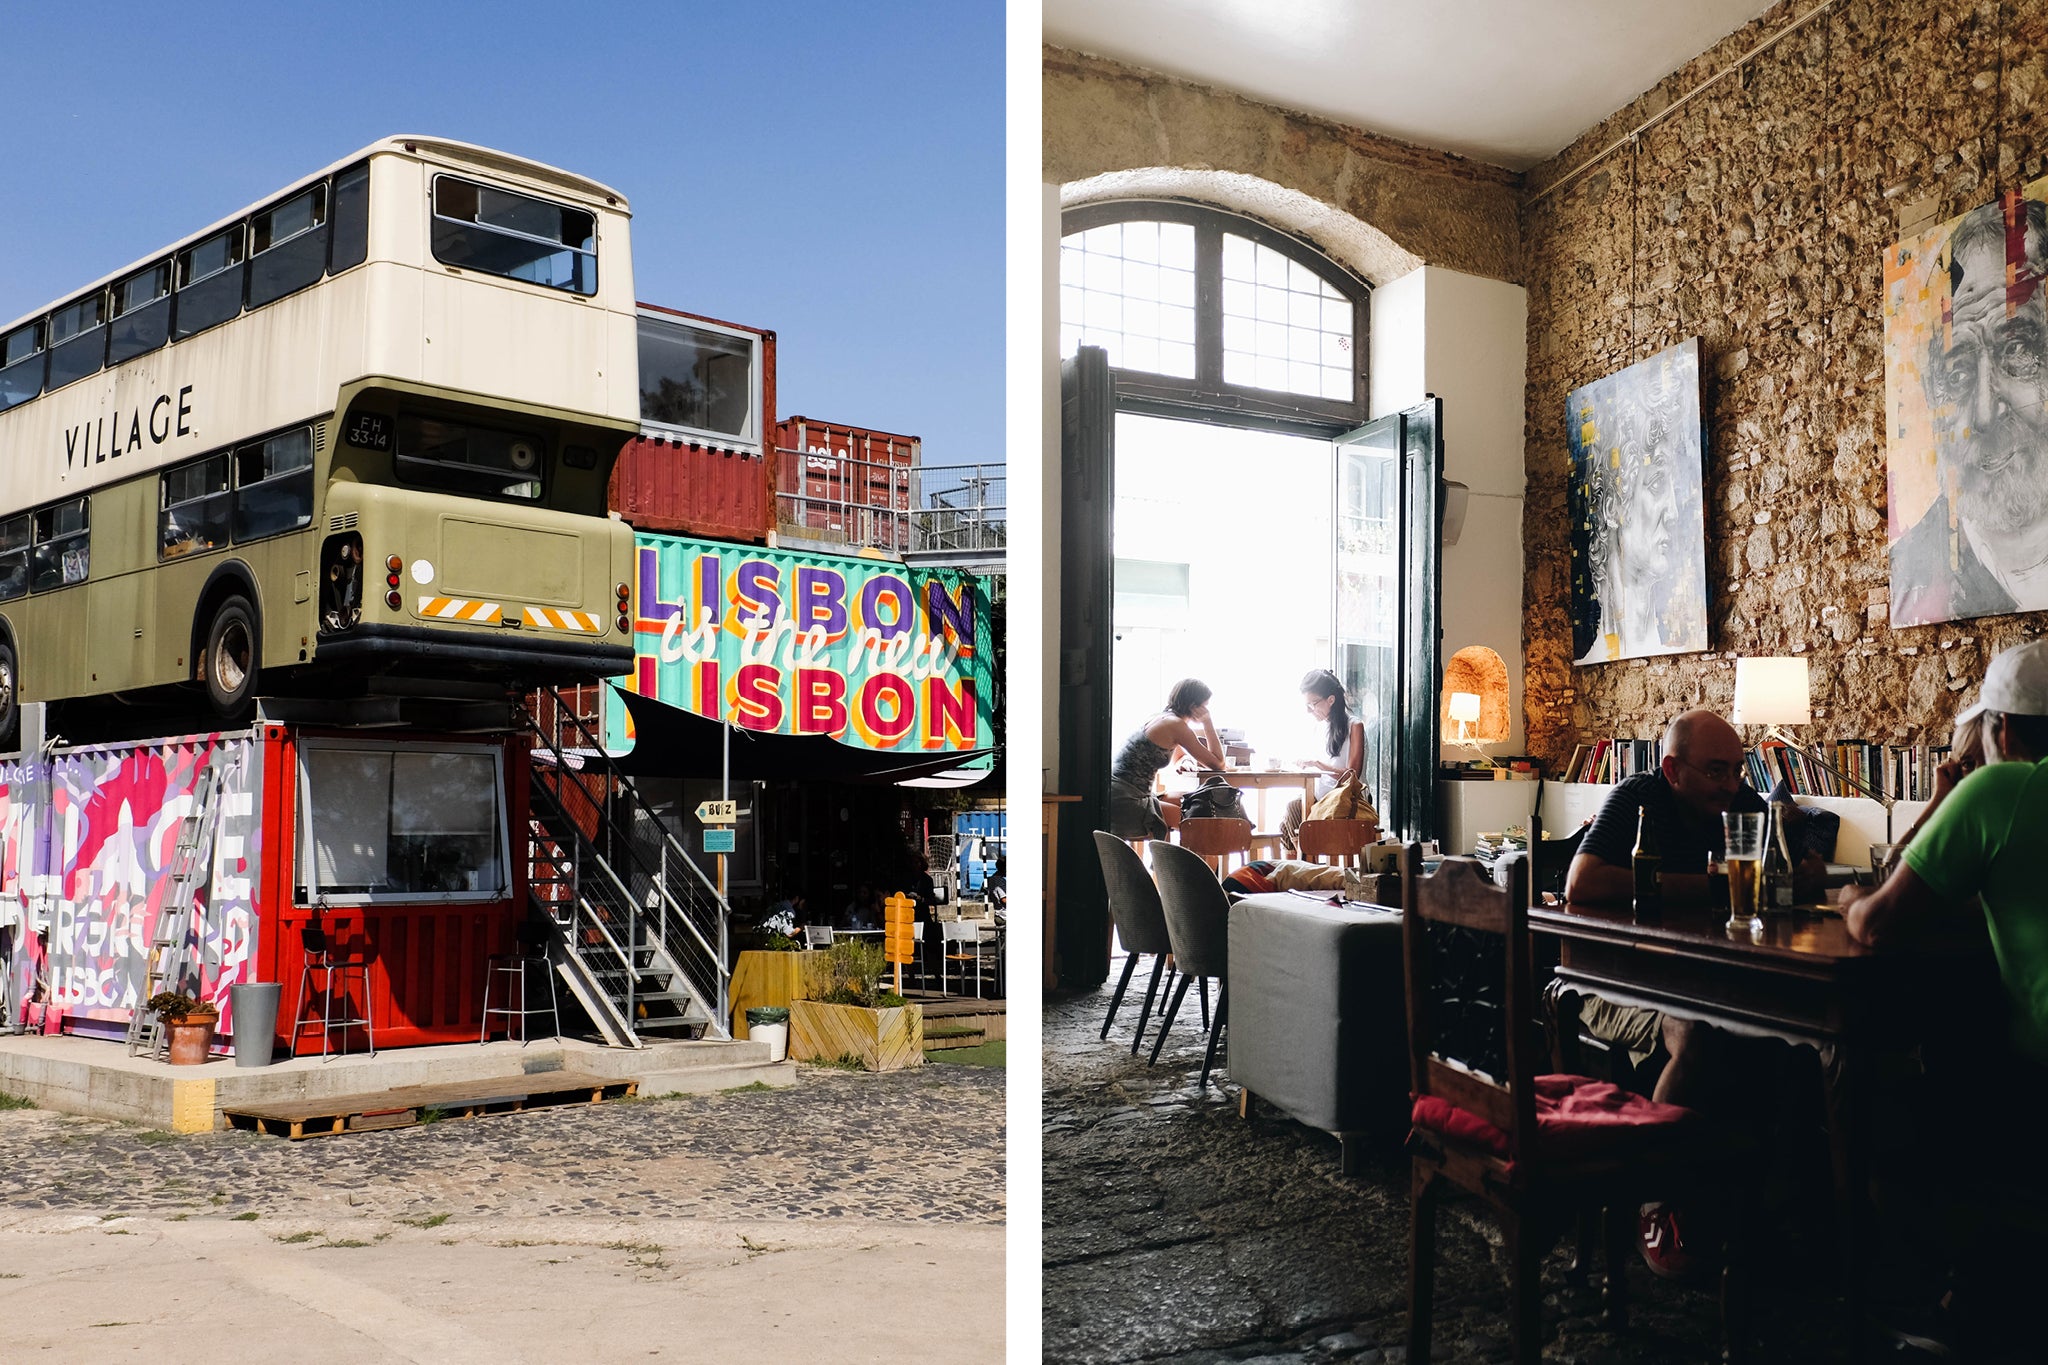 Art and cafe in Lisbon, Portugal — What do explore and see in Portugal